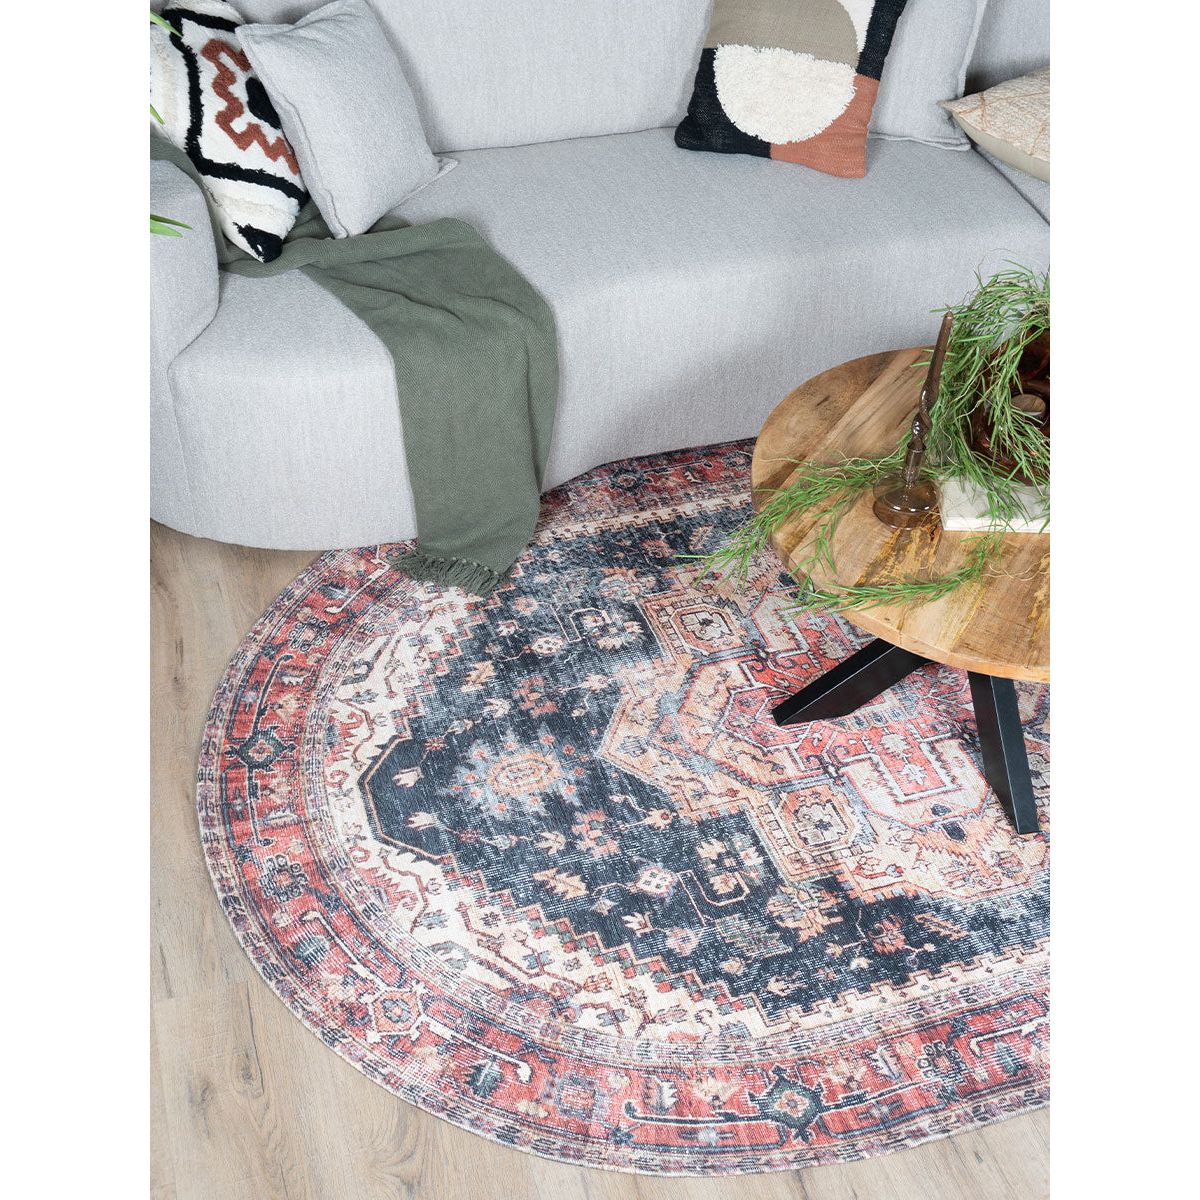 Rug Nora Red Oval Oval